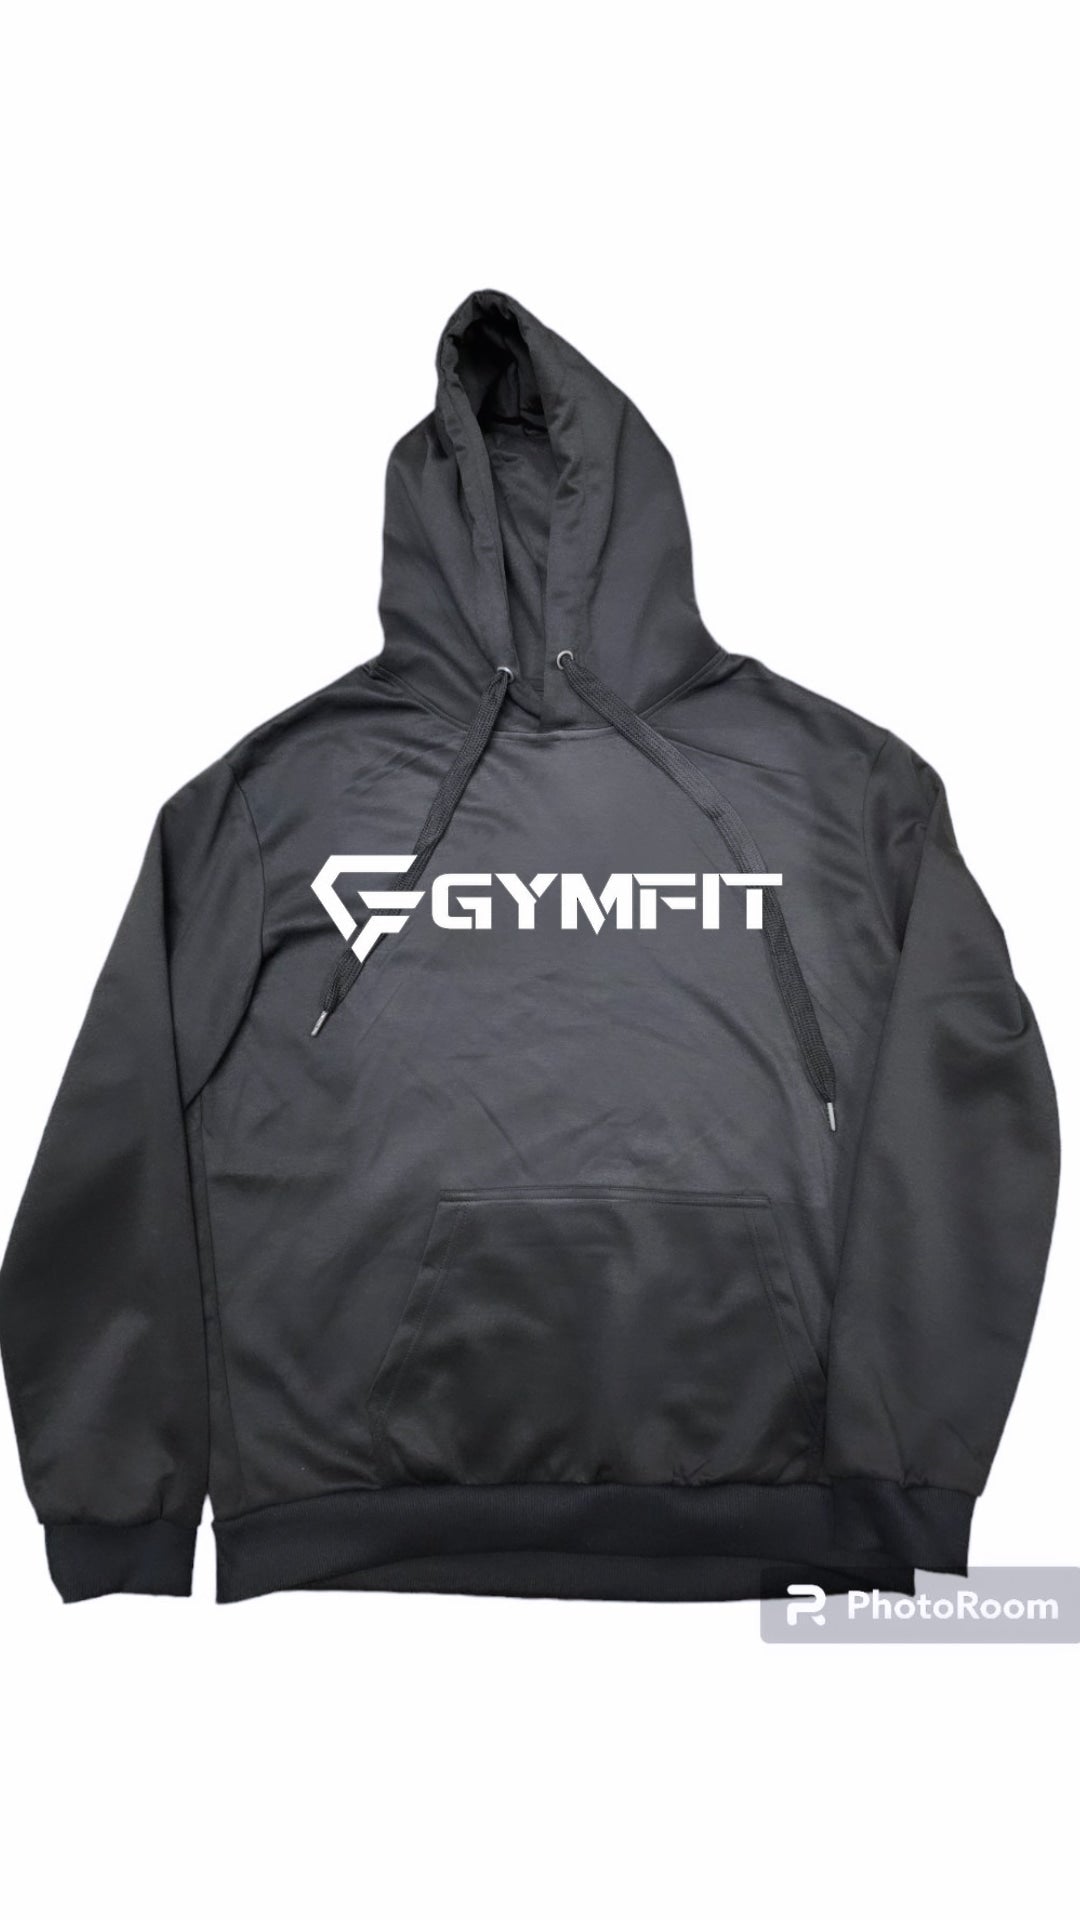 Men's Medium weight hoodie with OG GYMFIT Font